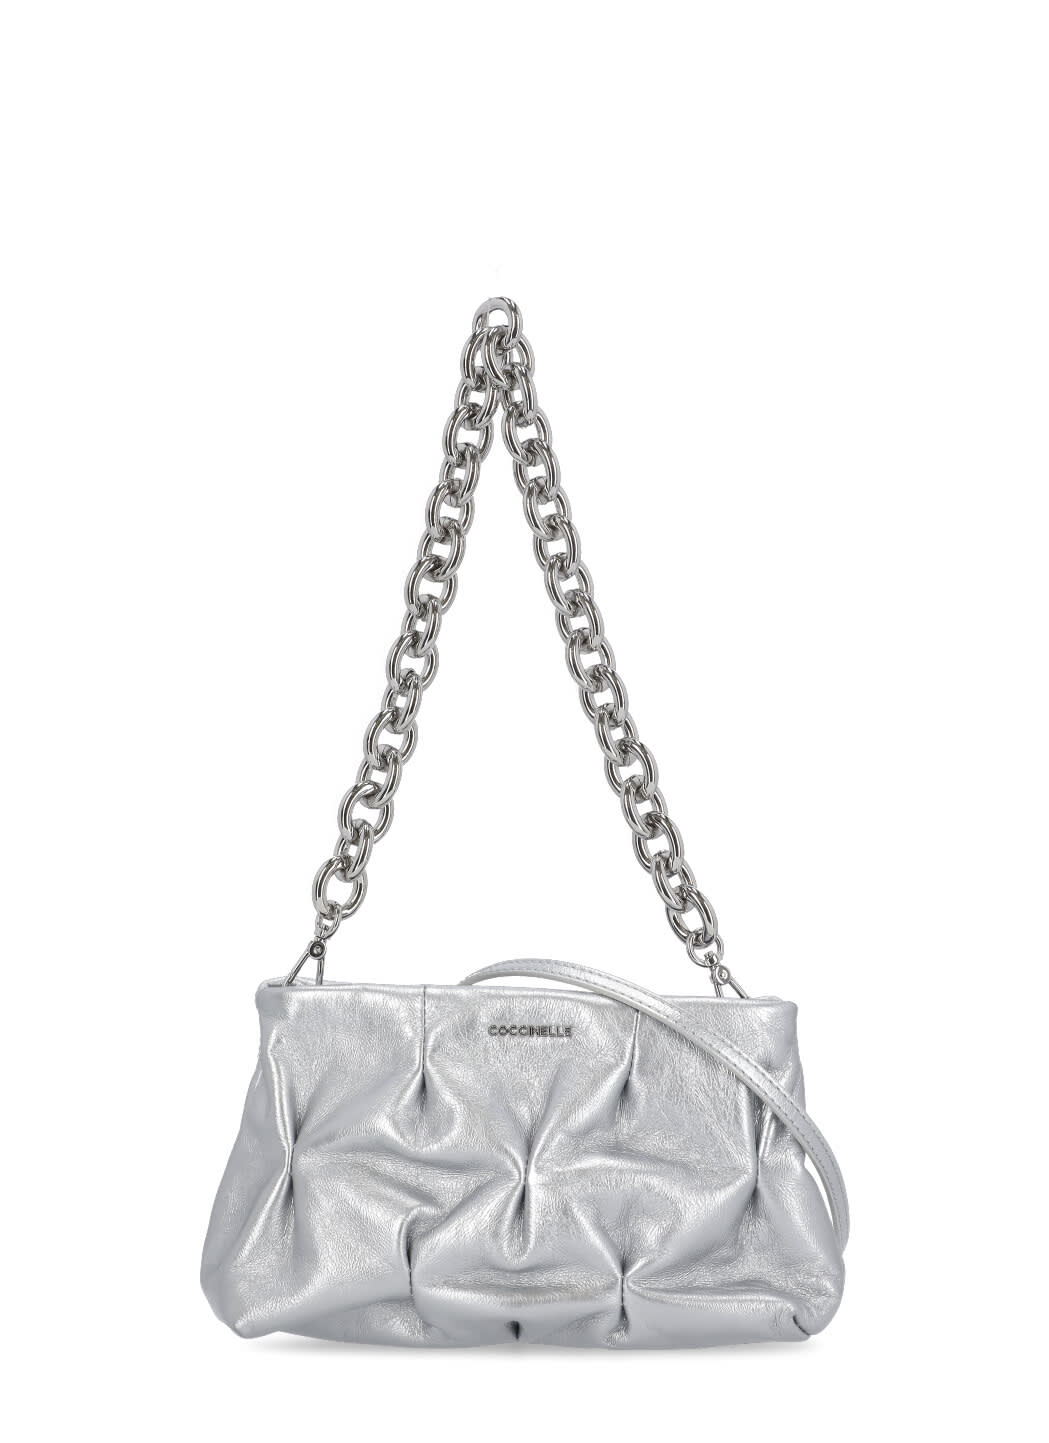 Coccinelle Ophelie Goodie Shoulder Bag In Silver | ModeSens